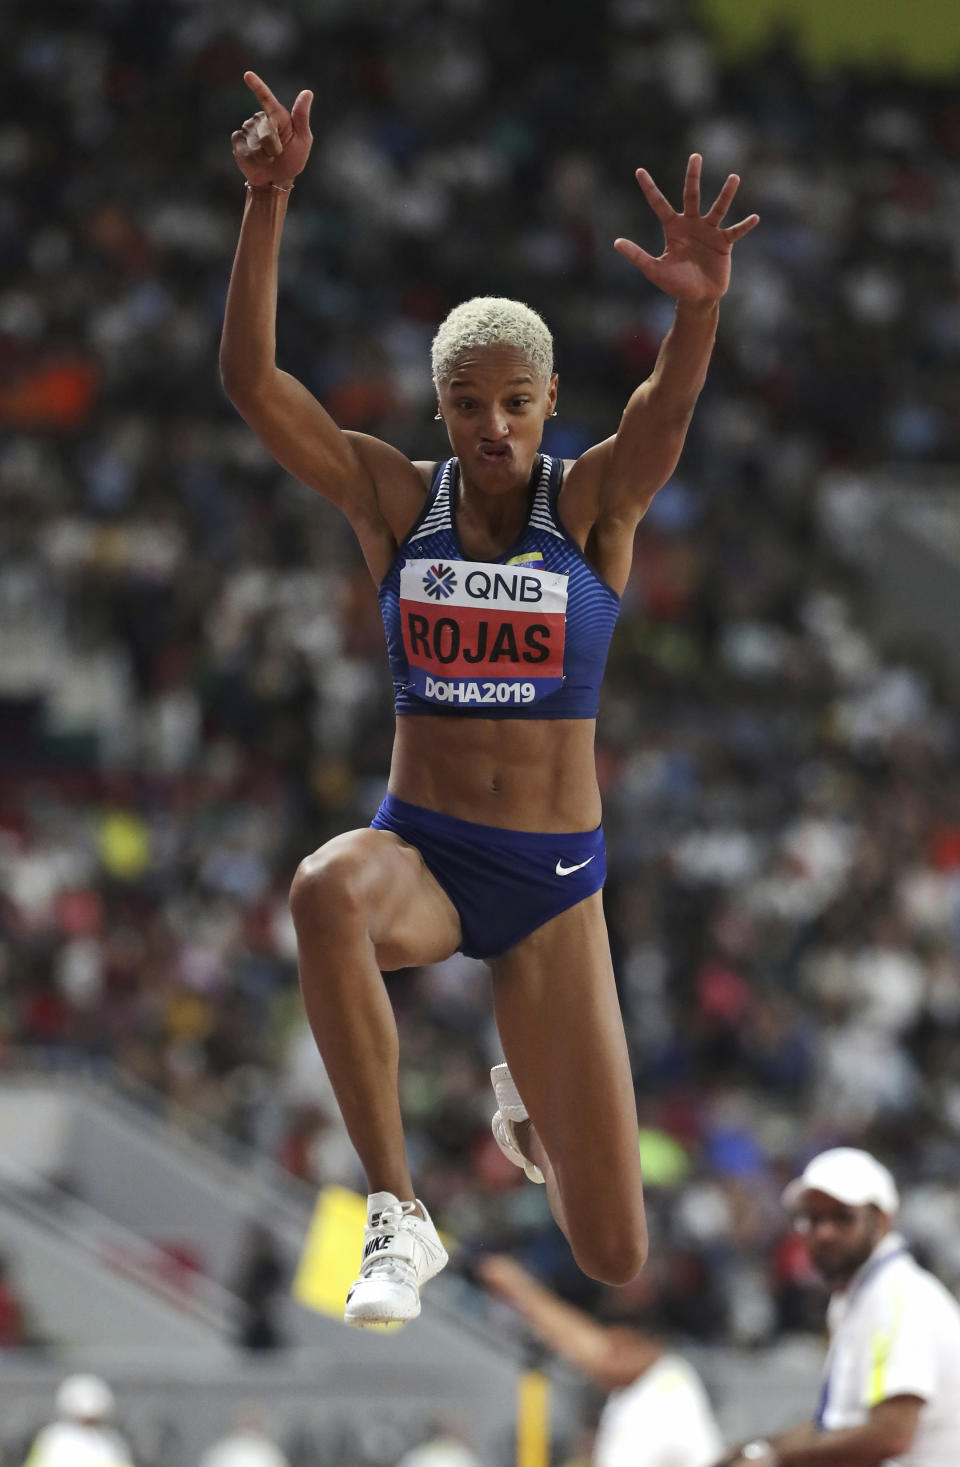 Yulimar Rojas, of Venezuela, competes in the women's triple jump final at the World Athletics Championships in Doha, Qatar, Saturday, Oct. 5, 2019. (AP Photo/Hassan Ammar)